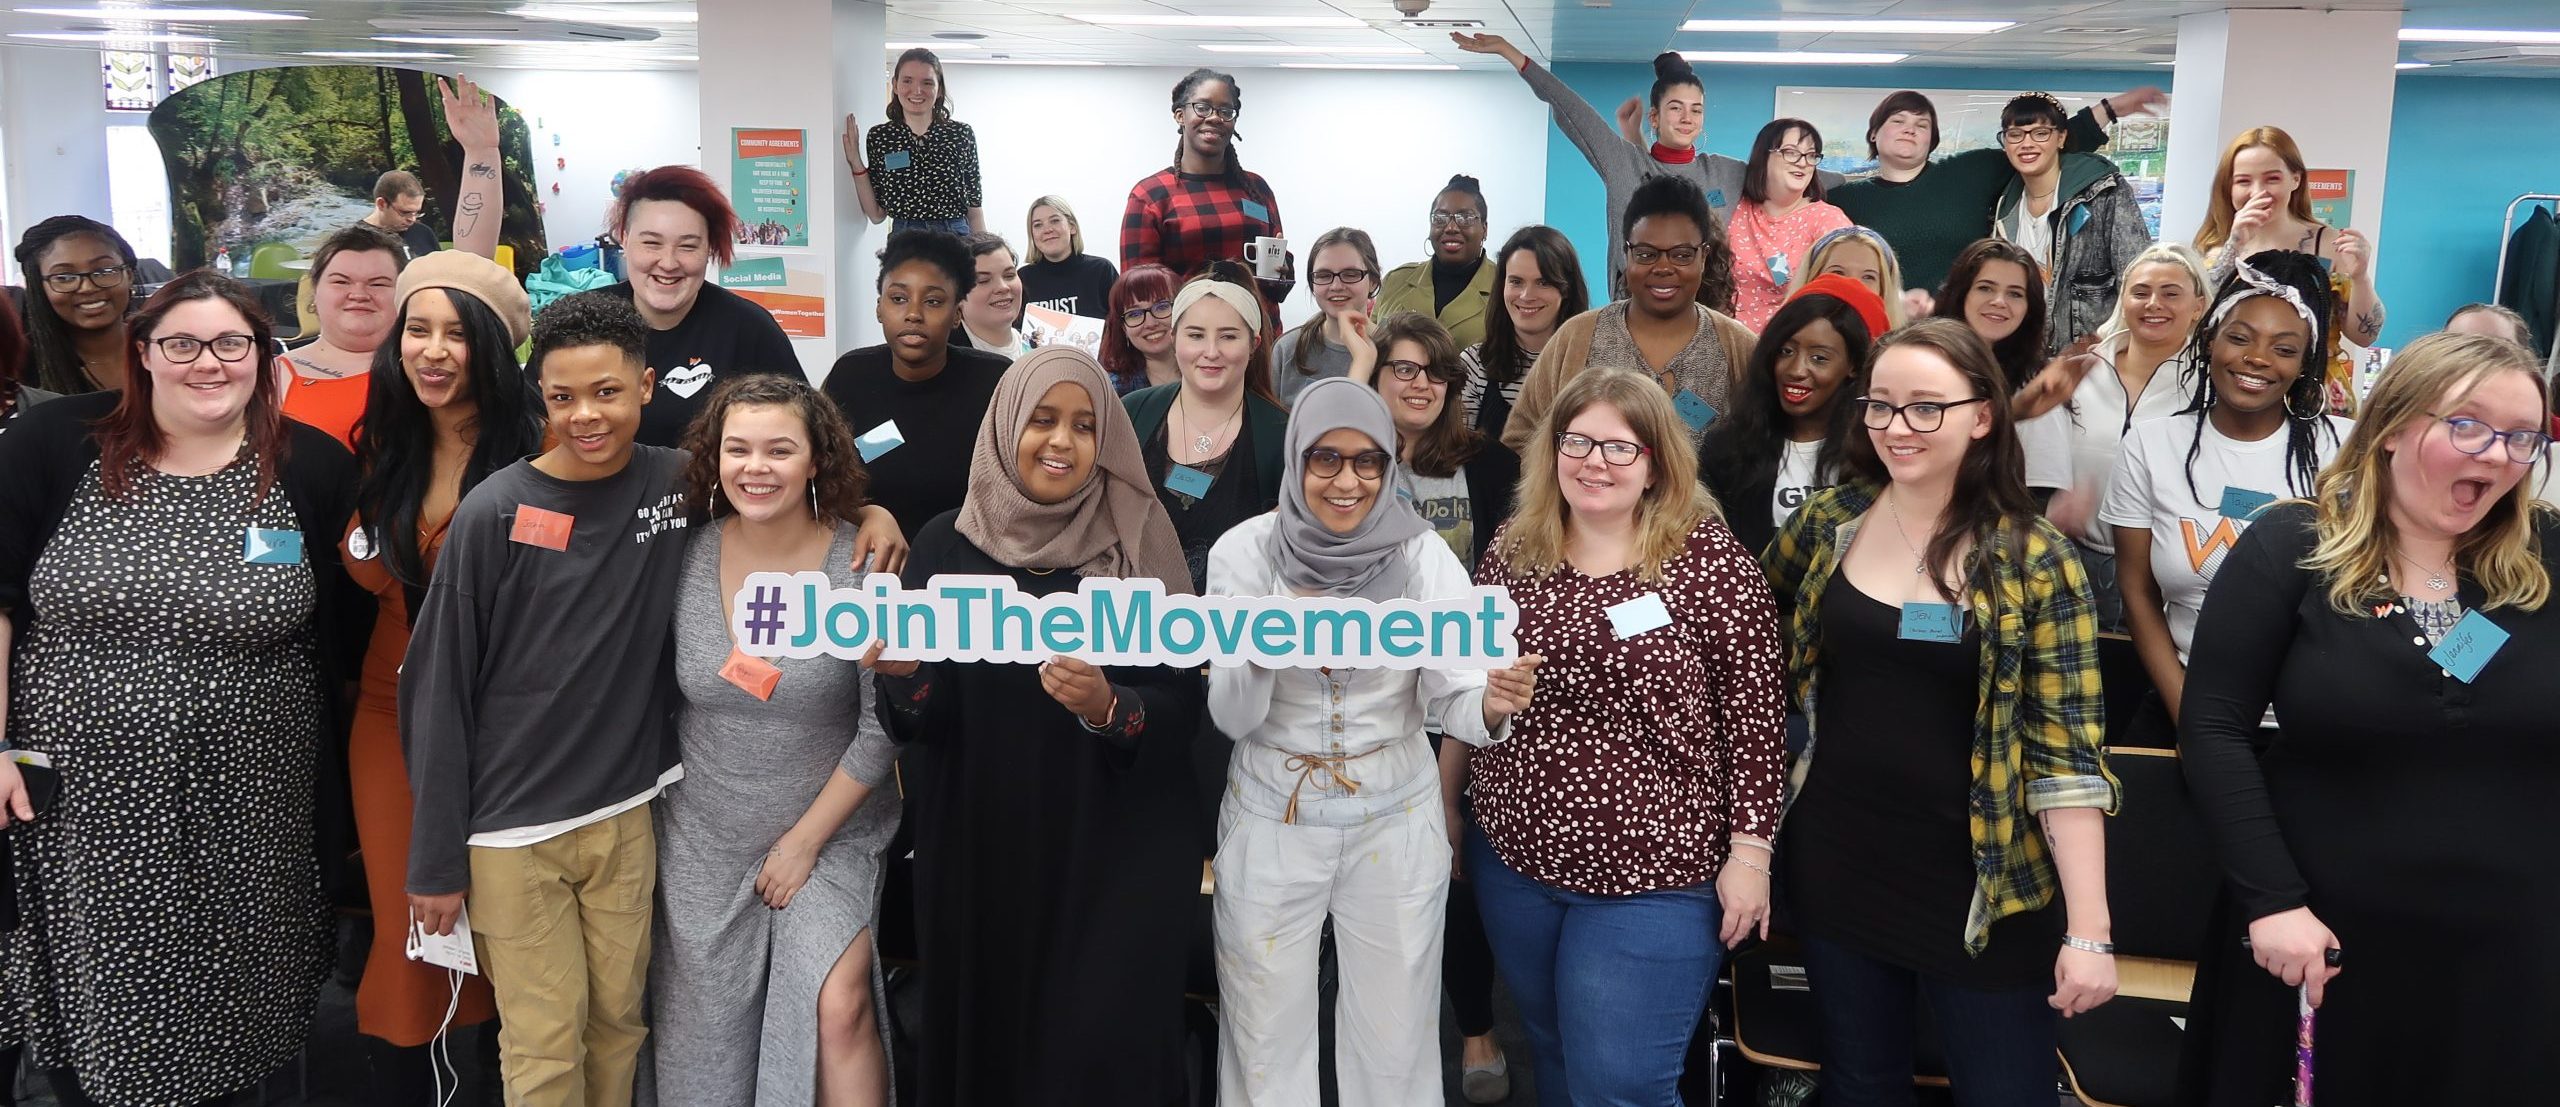 A big group of young women holding a sign that says #JoinTheMovement